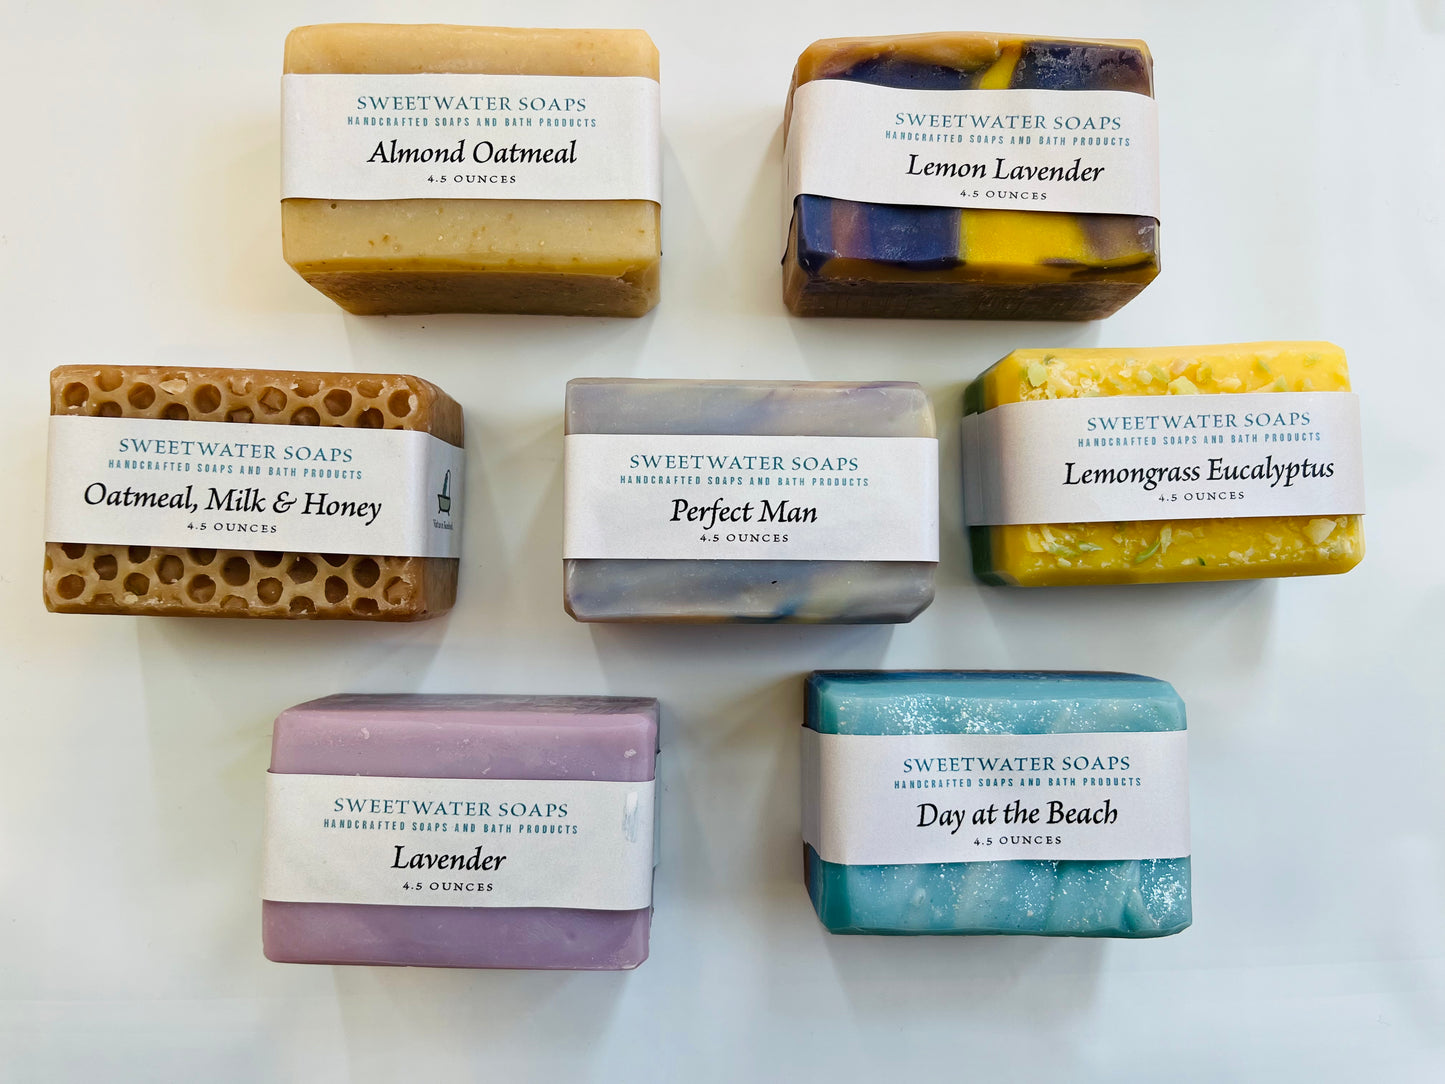 Sweetwater Soaps